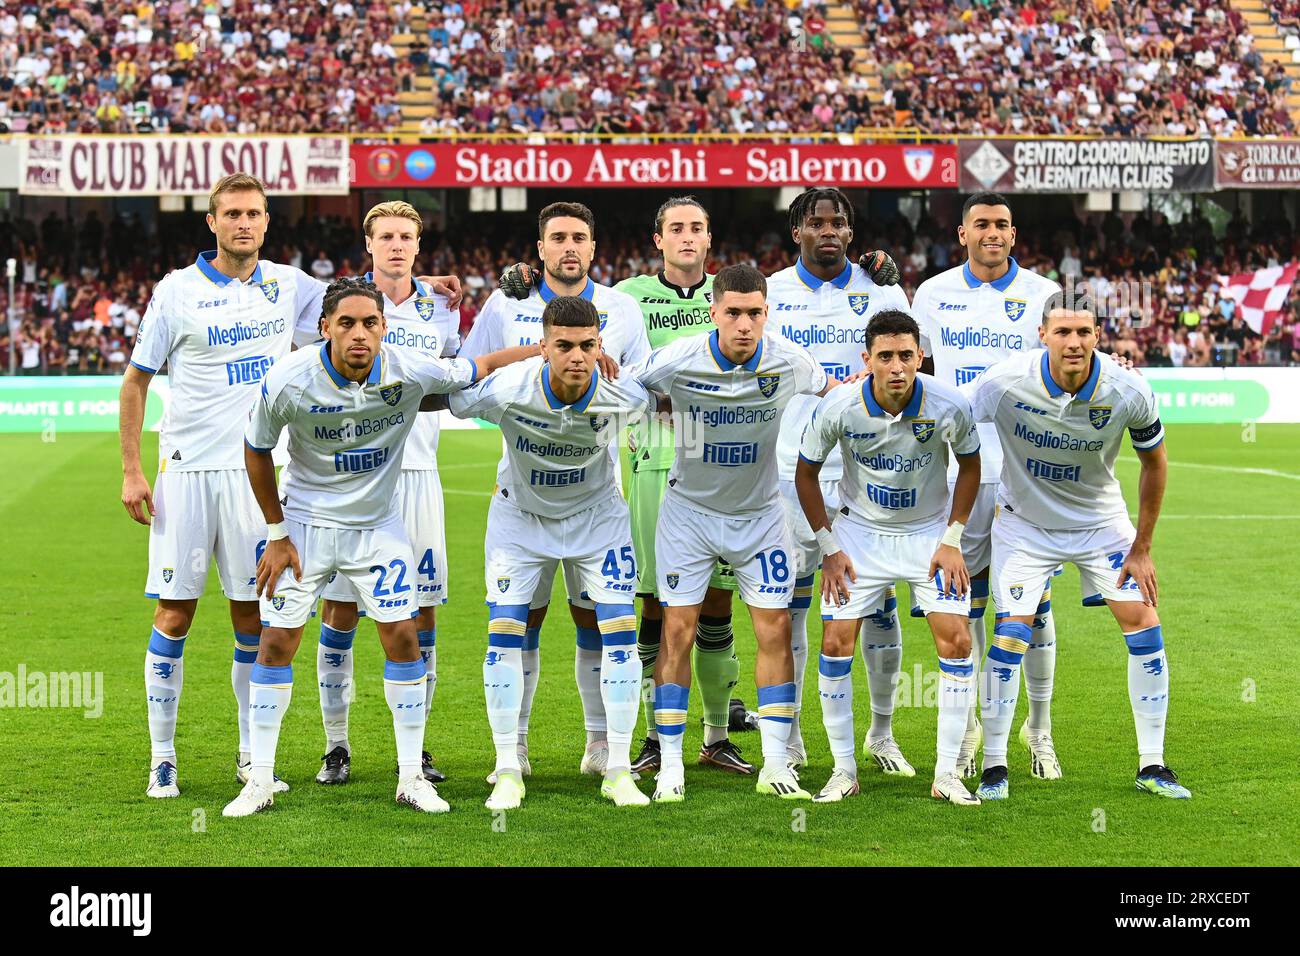 The Frosinone Calcio team is posing for the photograph before the Serie A TIM match between US Salernitana and Frosinone Calcio at Stadio Arechi, Sale Stock Photo